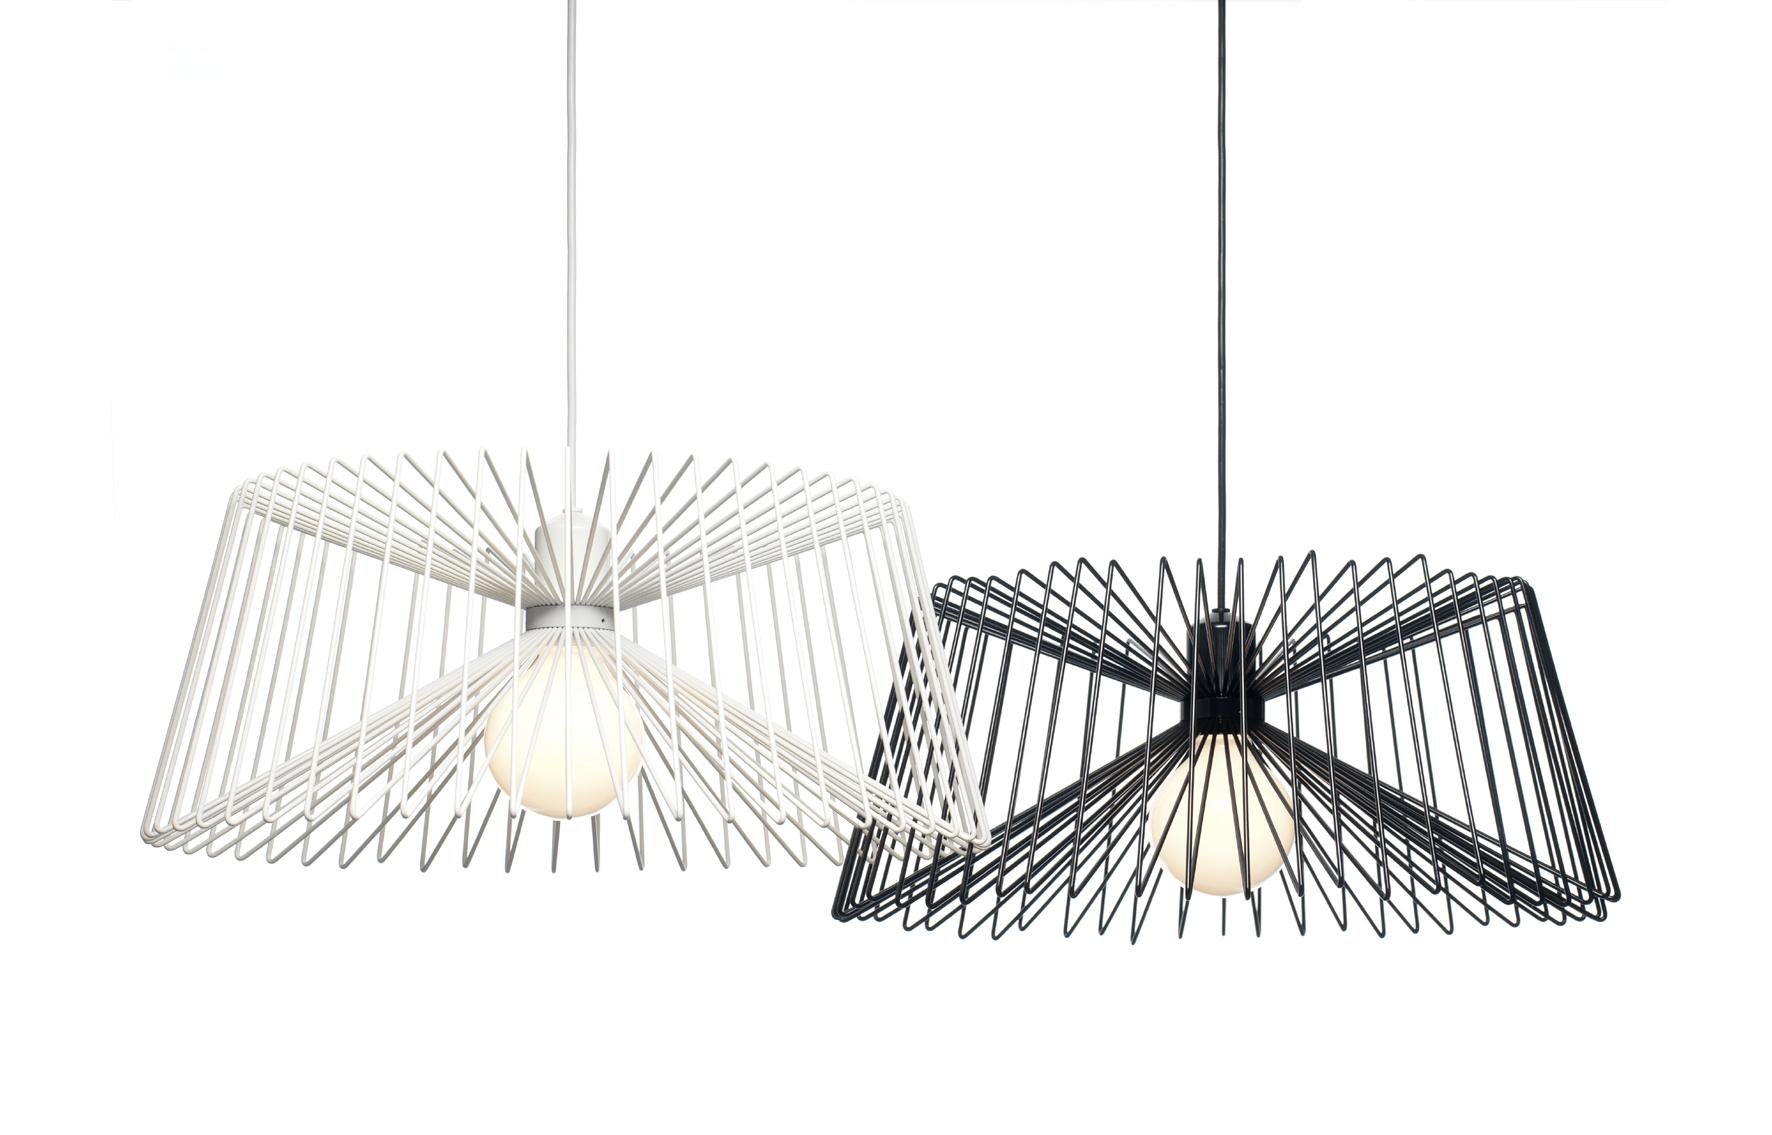 Mattias Ståhlbom designed the three pendant, available in white or black painted steel wire. The artful shade casts a wiry glow of textural playfulness on adjacent surfaces so this is the perfect fixture when a cagey bit of edge is